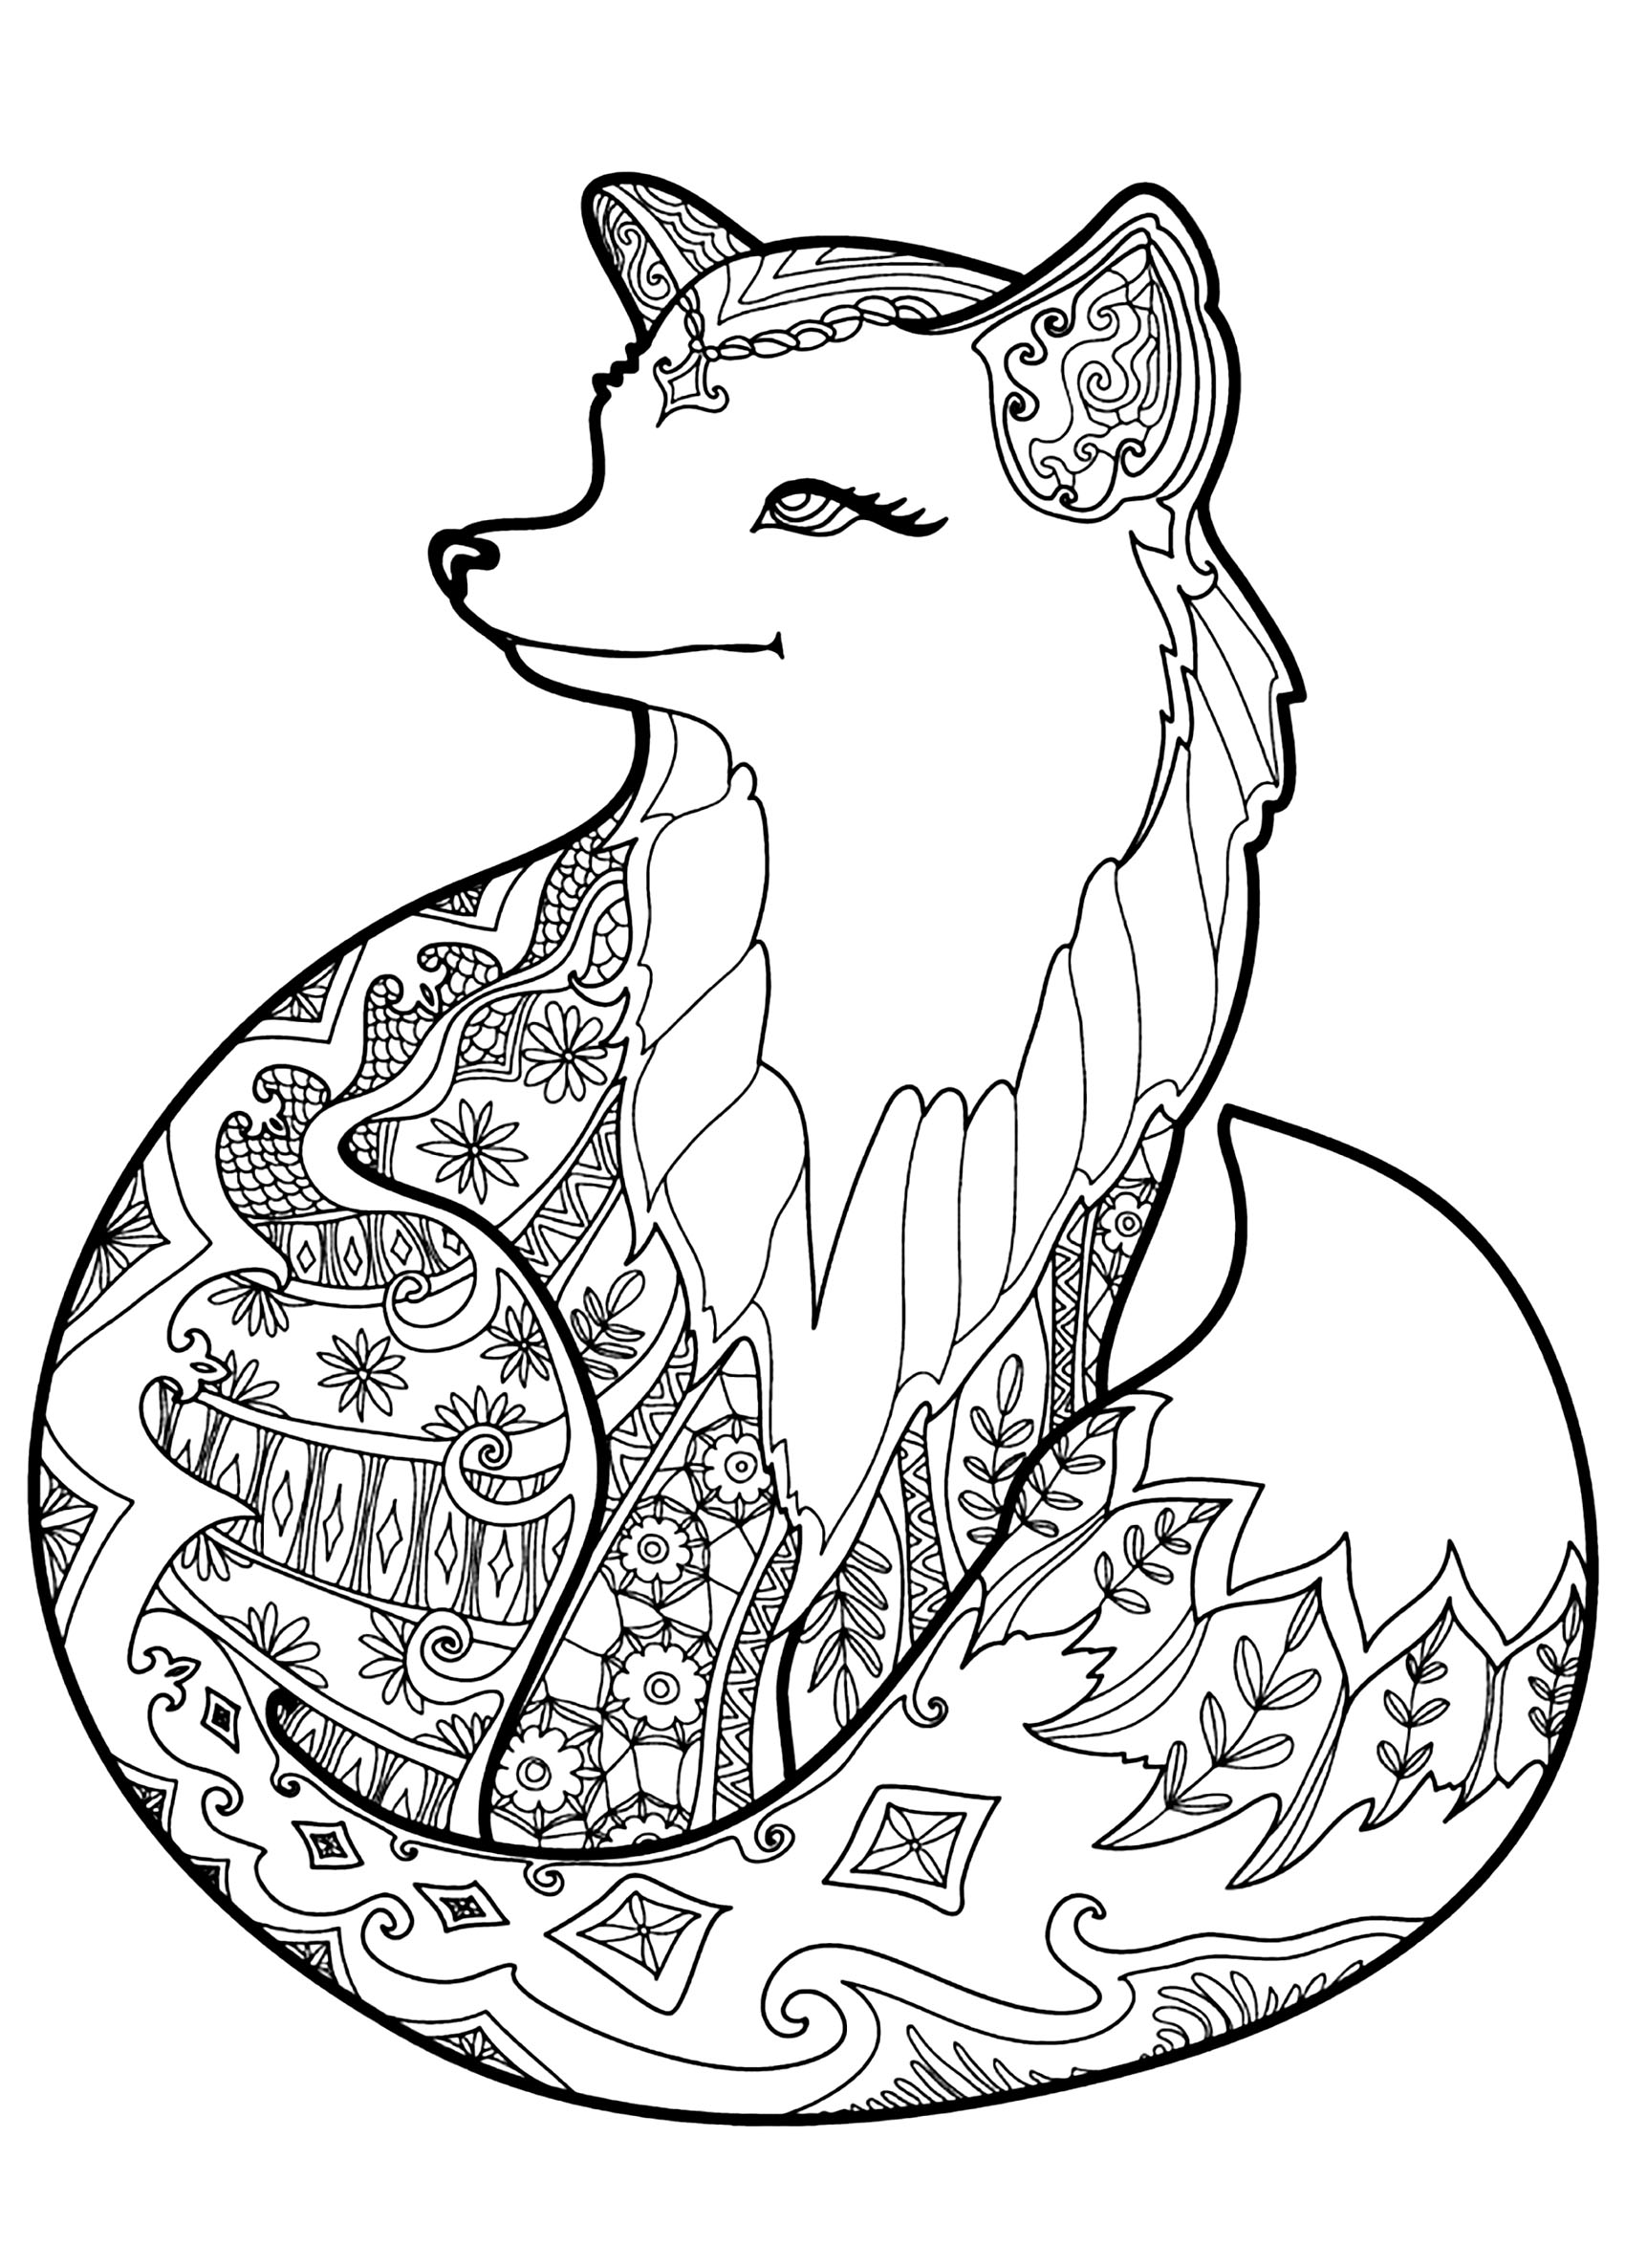 Fox with beautiful patterns - Foxes Adult Coloring Pages